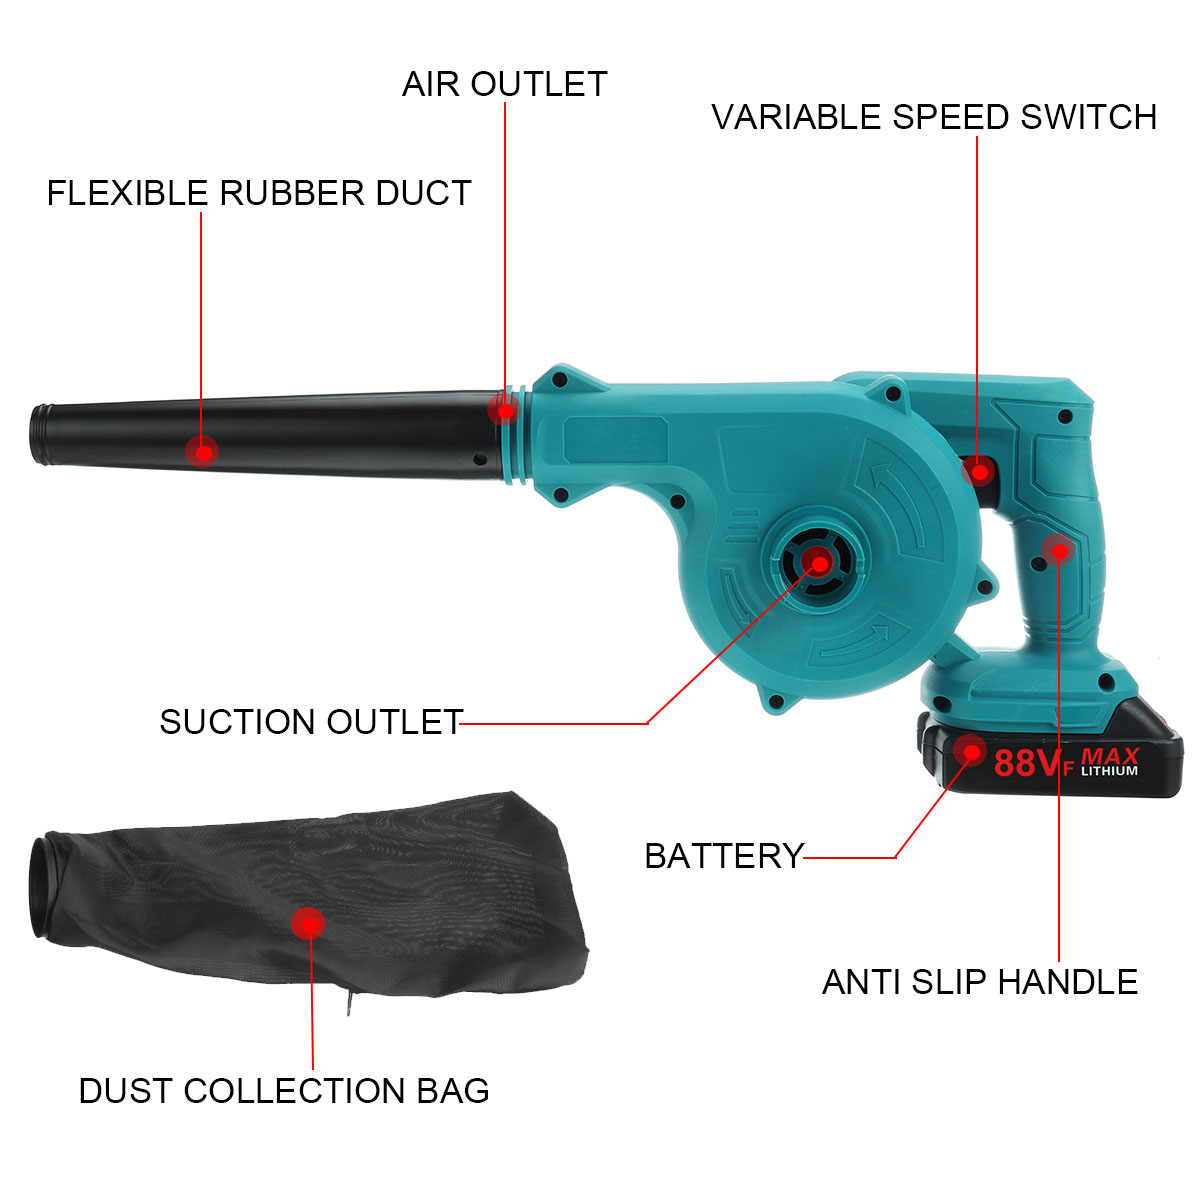 2-IN-1-Cordless-Electric-Air-Blower--Suction-Handheld-Leaf-Computer-Dust-Collector-Cleaner-Power-Too-1851240-10